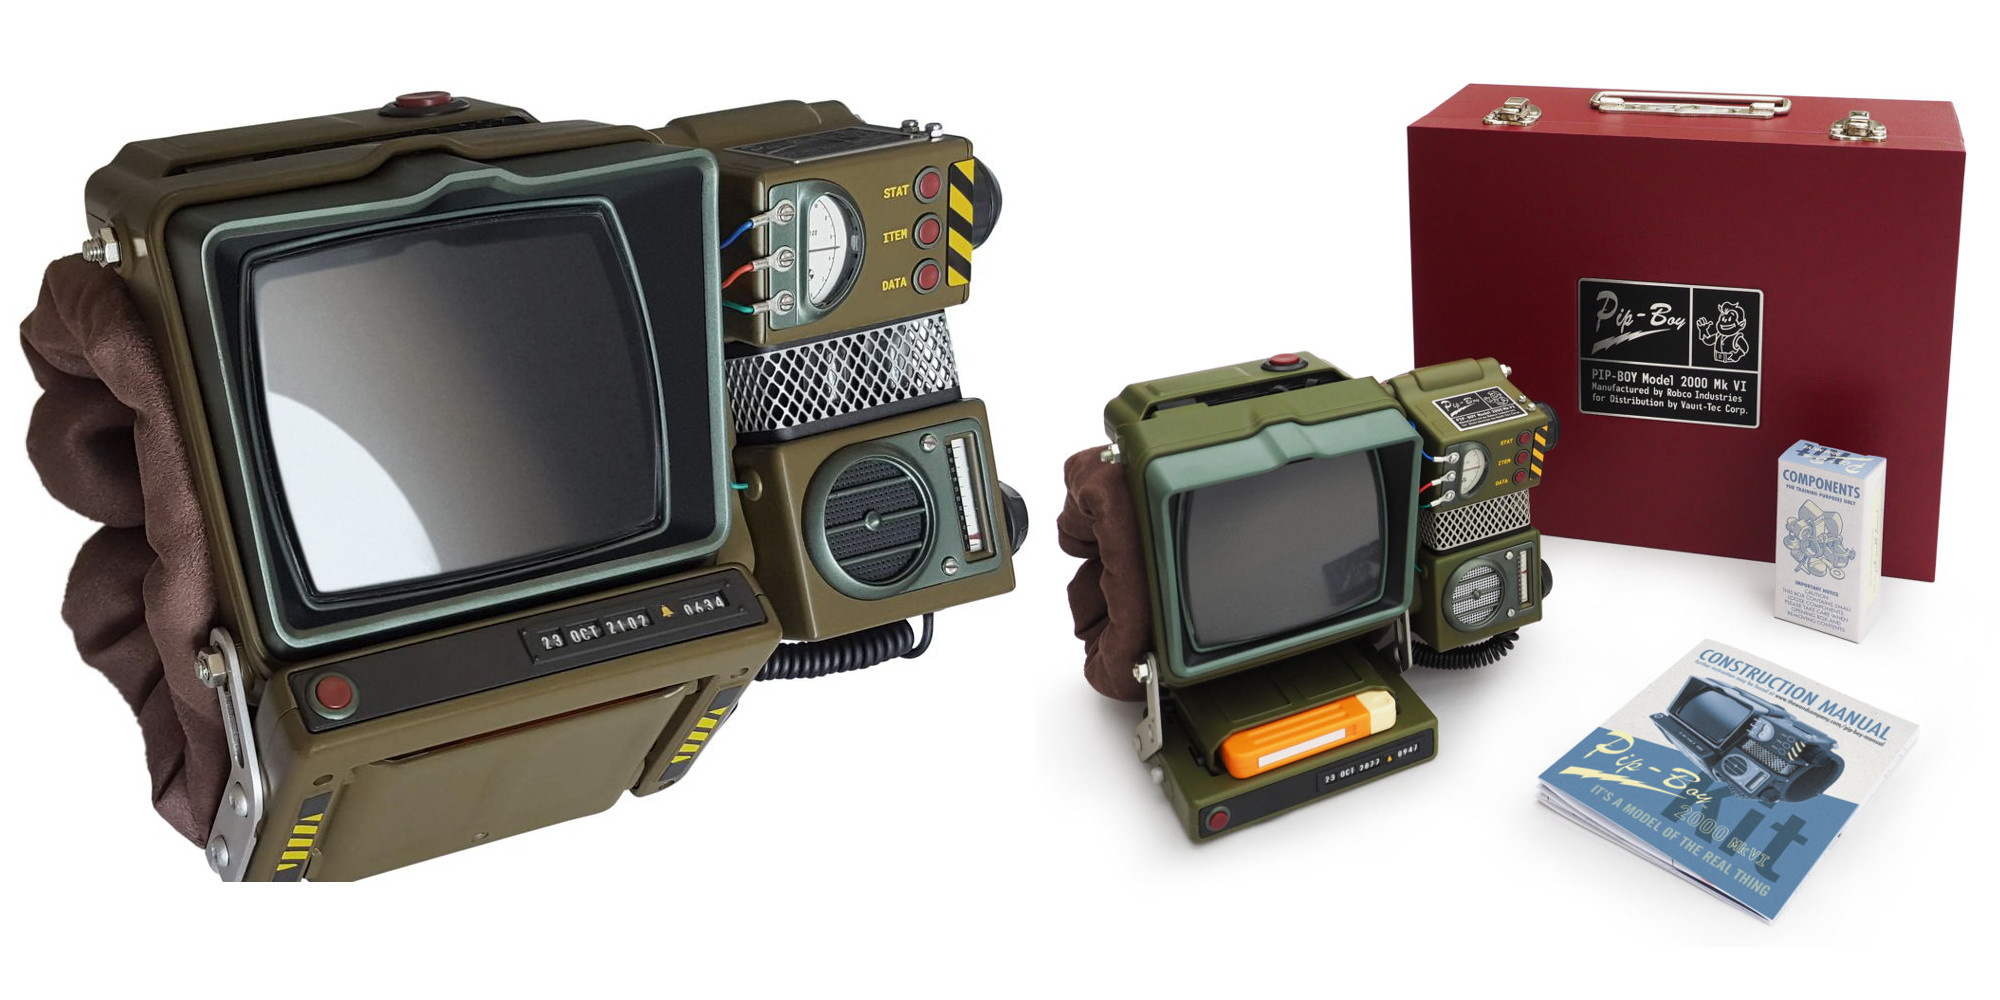 Build your own Fallout Pip-Boy with this 100-piece kit for $60